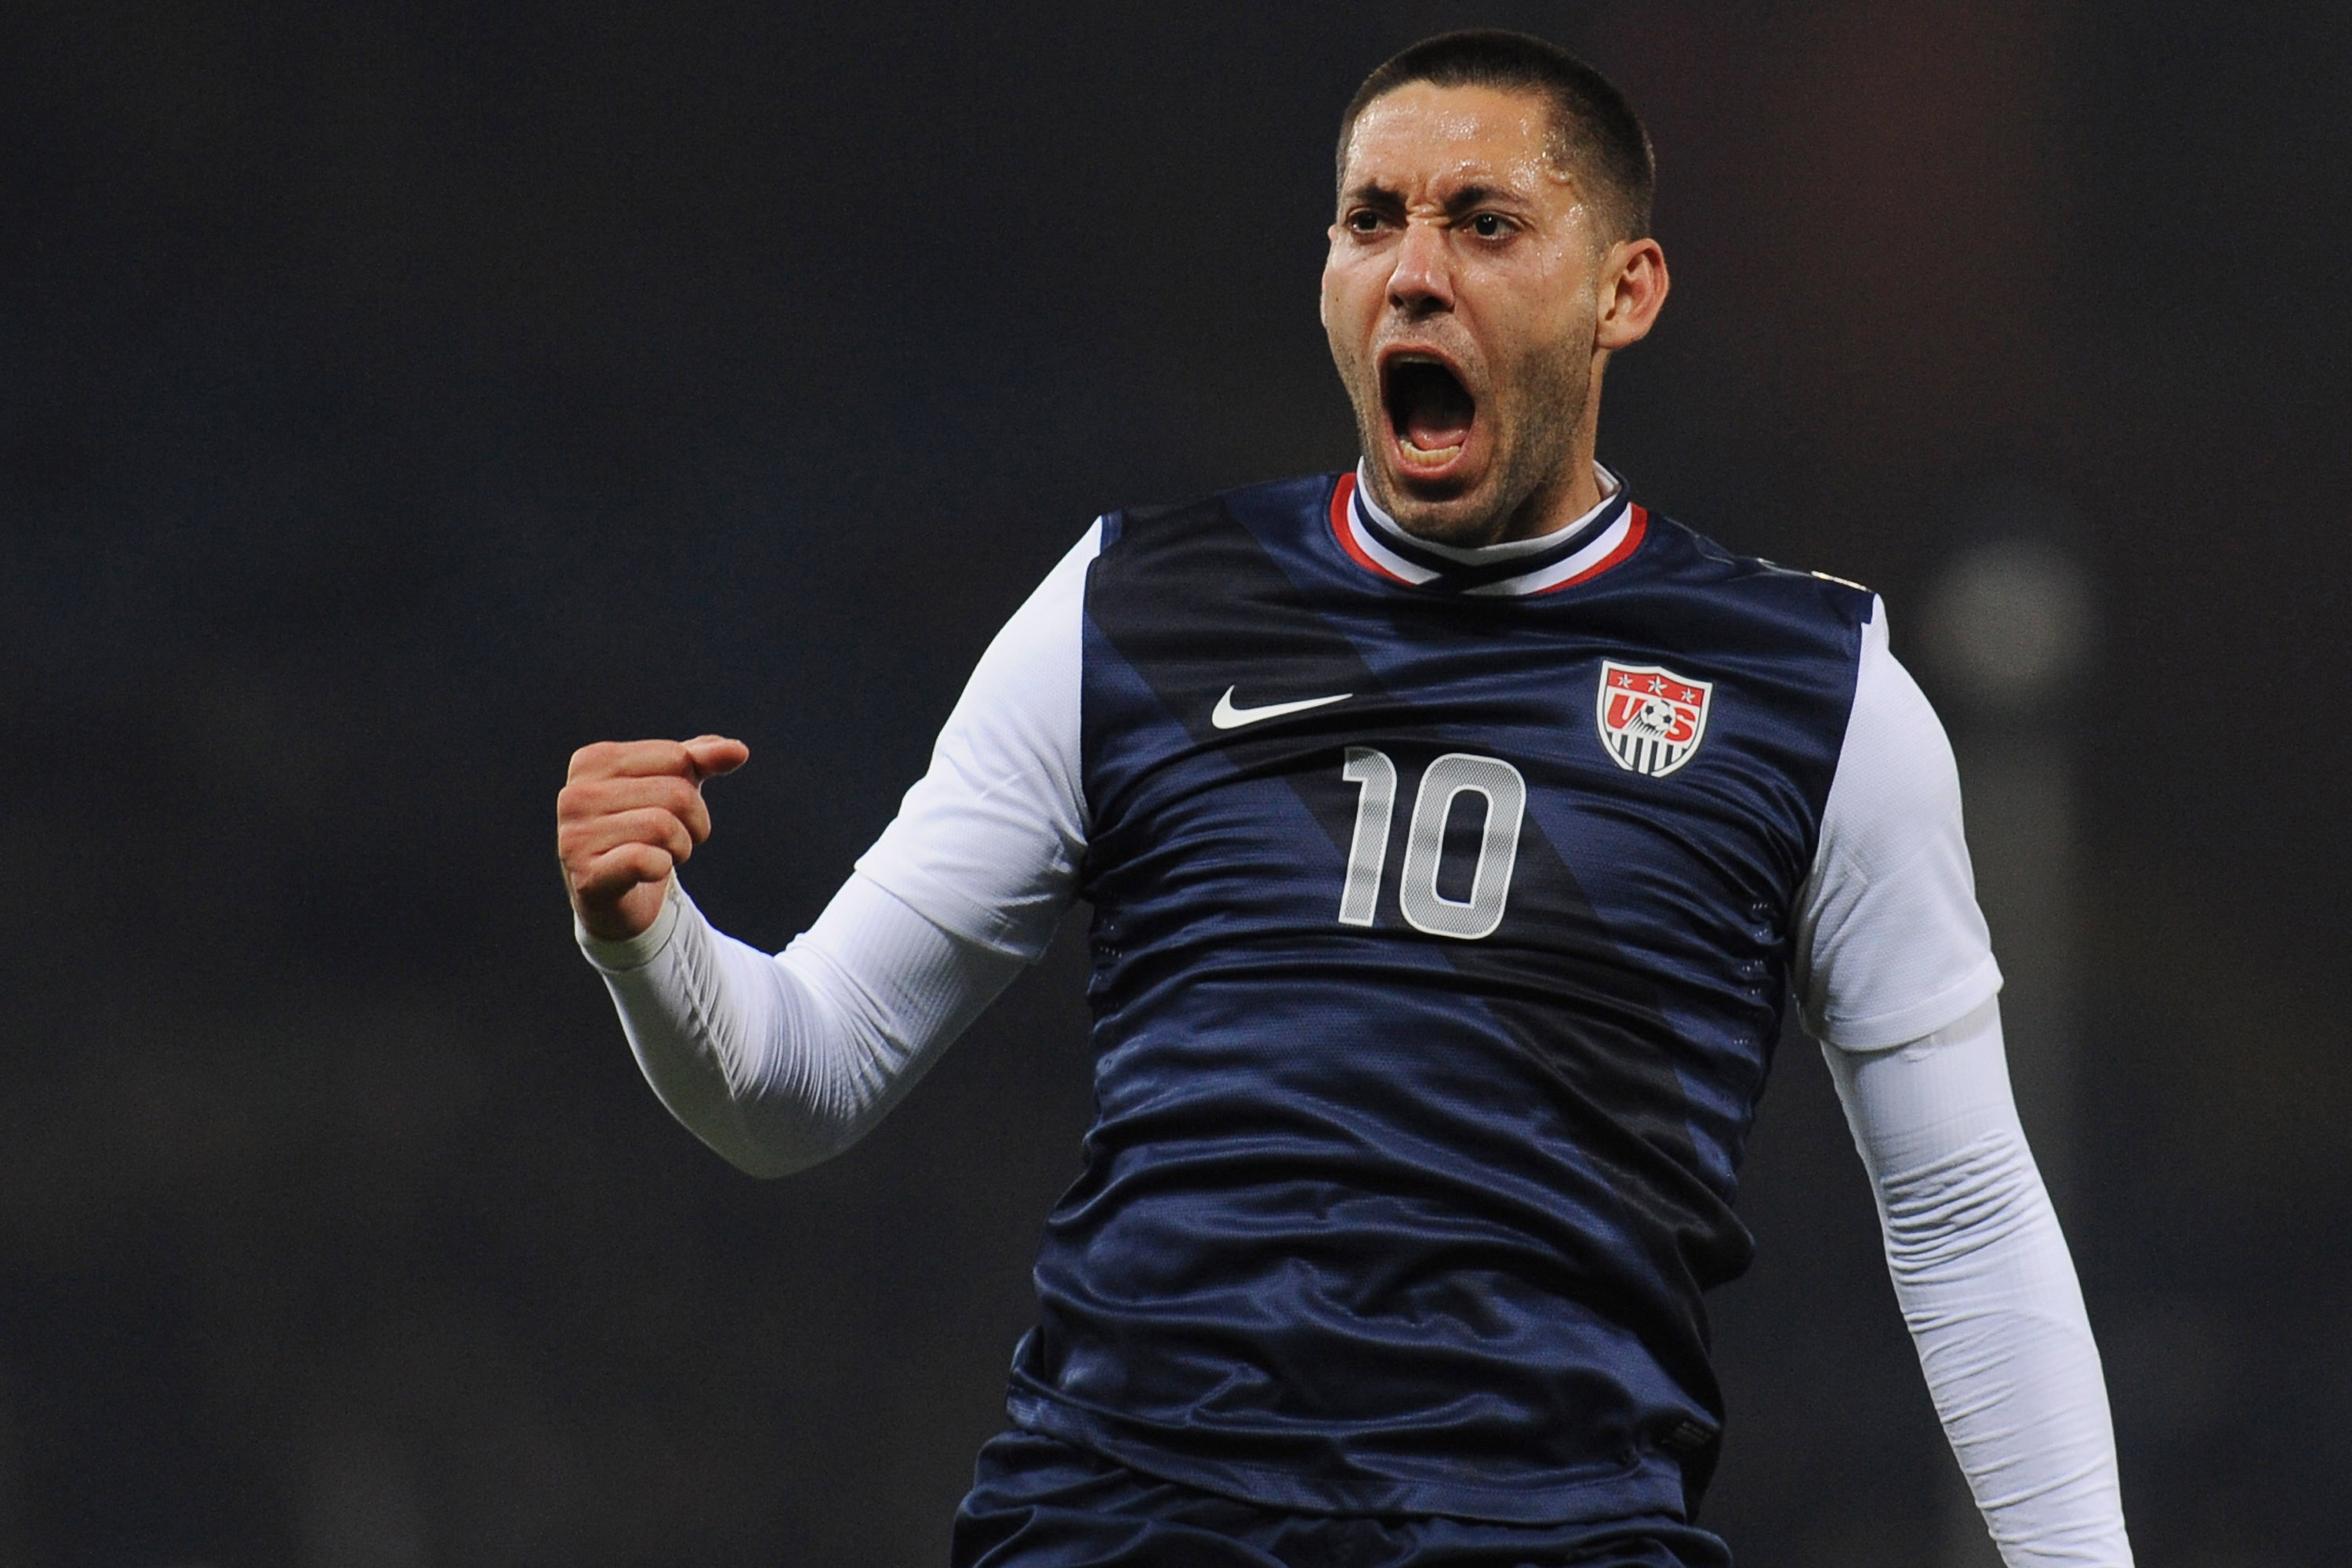 Clint Dempsey celebrates the opening goal during the international friendly match between Italy and USA at Luigi Ferraris Stadium on February 29, 2012 in Genoa, Italy. (Valerio Pennicino—Getty Images)